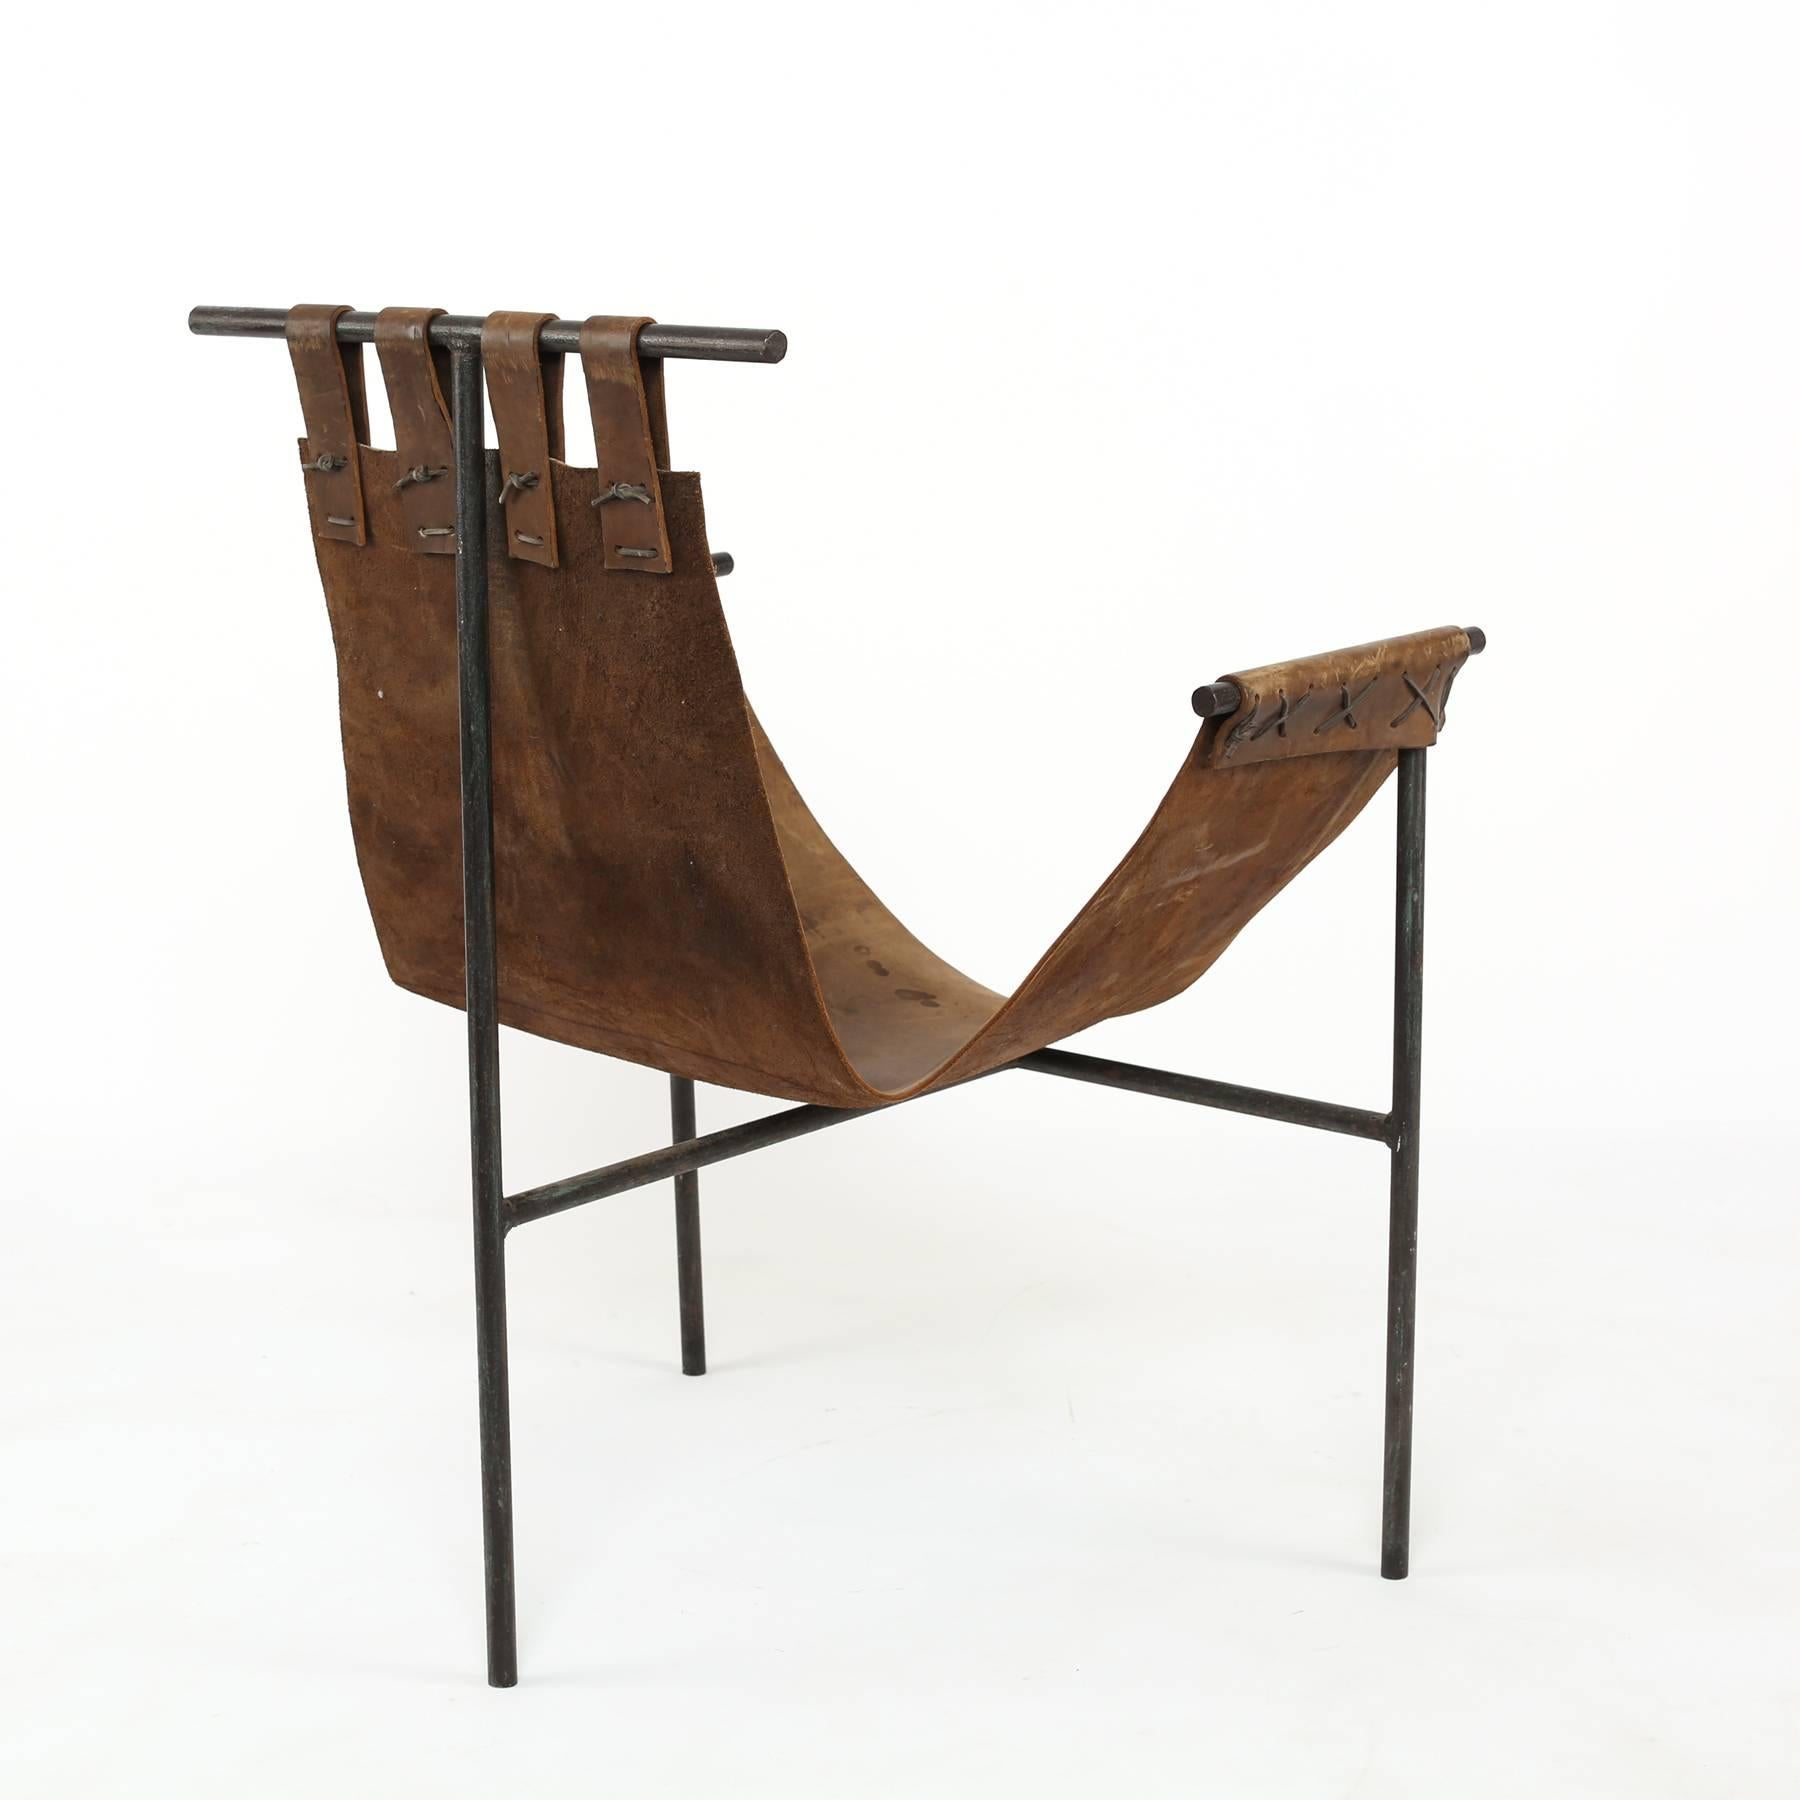 Iron and saddle leather sling chair, circa early 1970s. This example was designed by Bill Tull an Arizona architect. It has a beautifully patinated leather sling with a tripod leg iron frame.